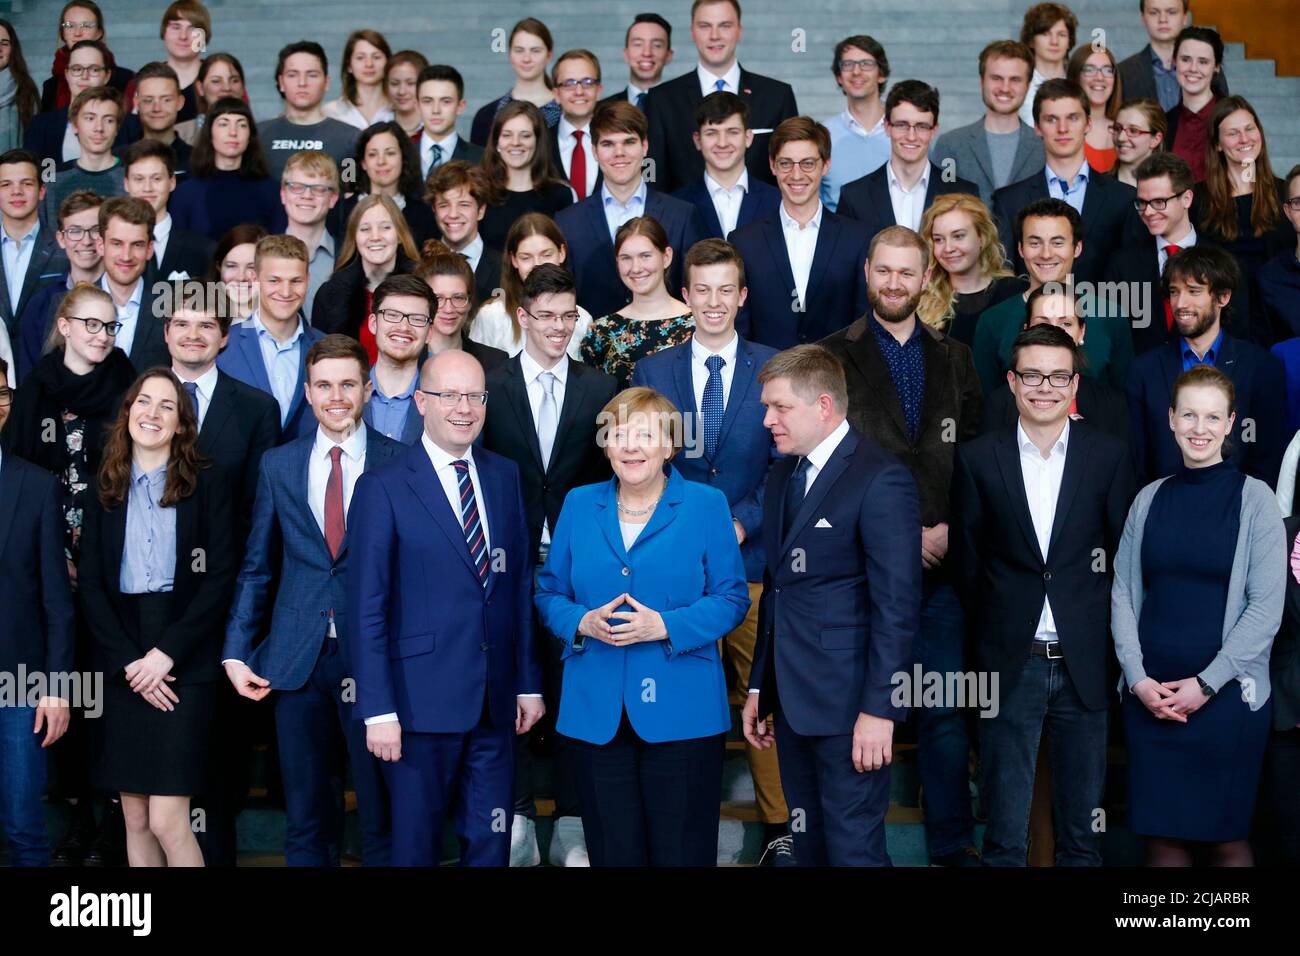 Czech Republic Prime Minister Bohuslav Sobotka (L to R), German Chancellor Angela Merkel and Slovakian Prime Minister Robert Fico  pose for a picture with school pupils of all three countries at the Chancellery in Berlin, Germany, April 3, 2017. REUTERS/Hannibal Hanschke Foto Stock